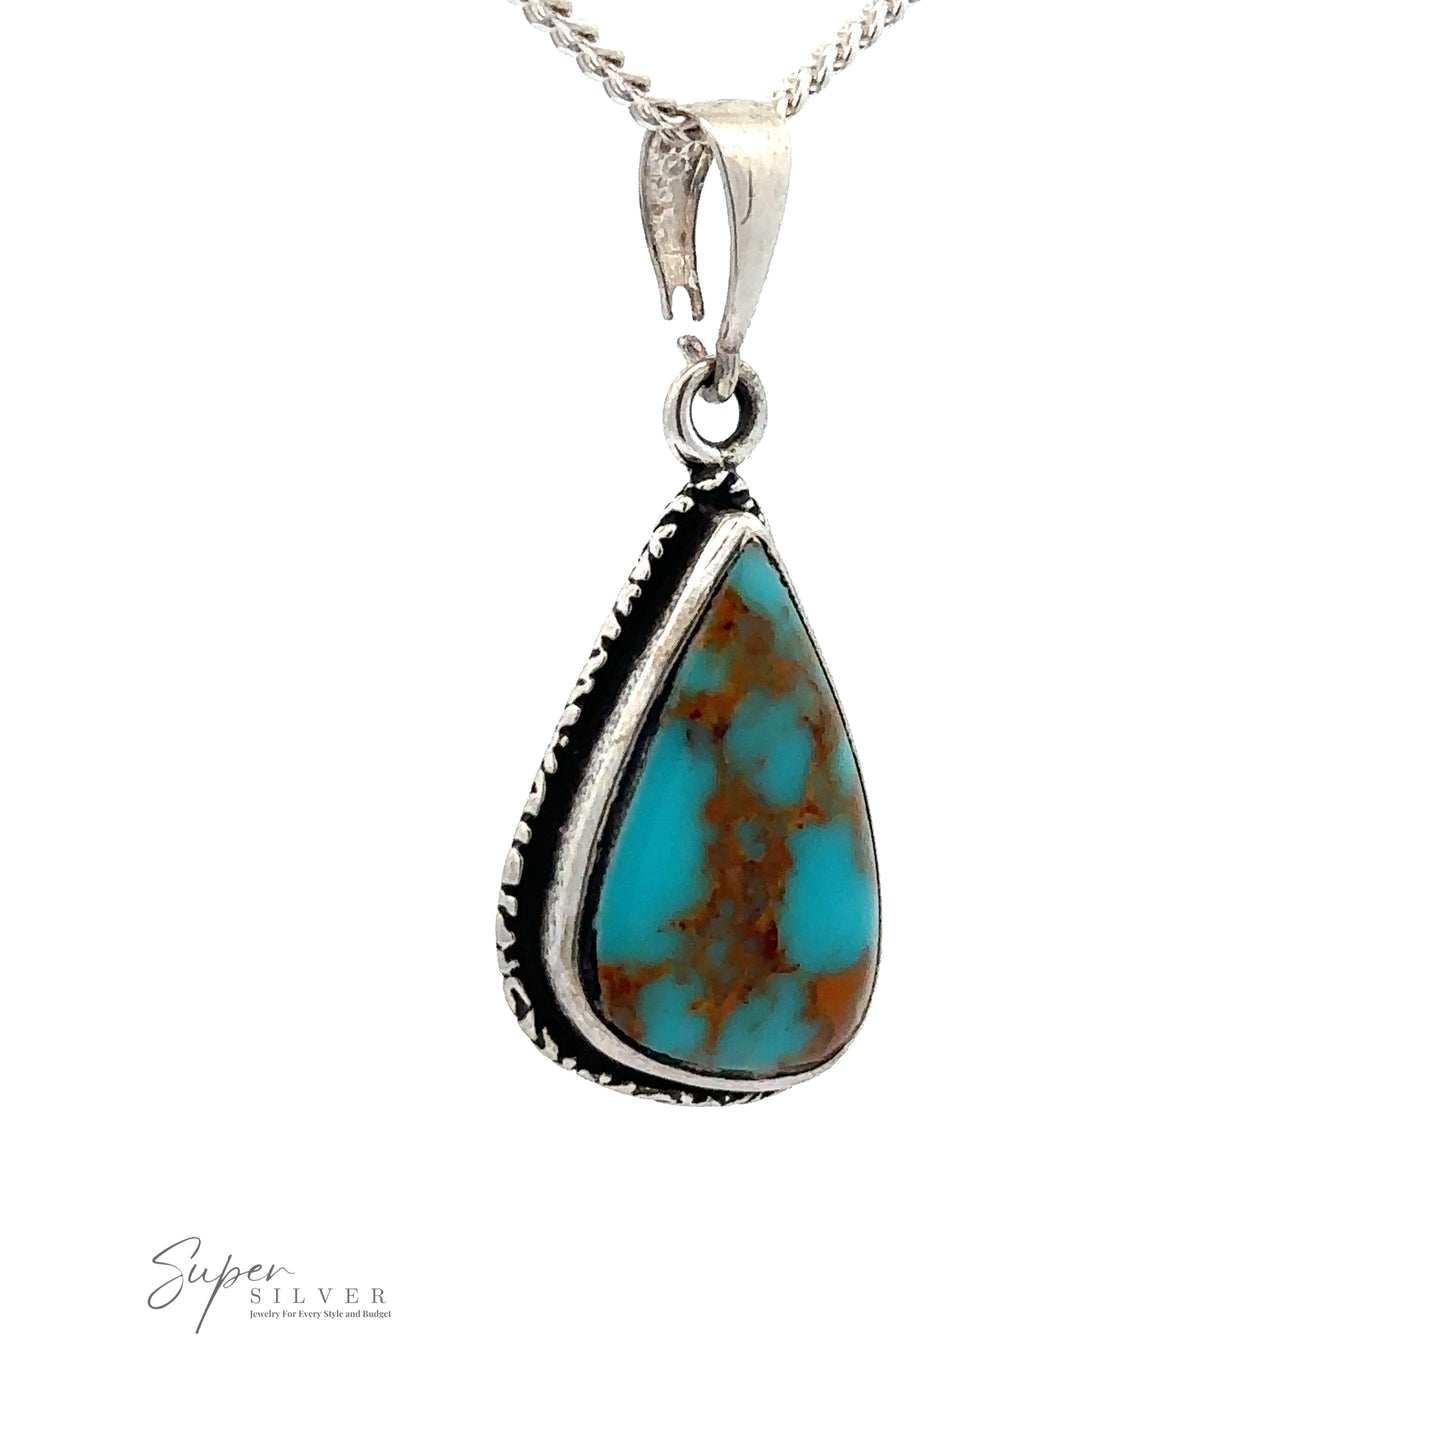 
                  
                    An Irregular Teardrop Bisbee Turquoise Pendant with Etched Border, featuring intricate brown veining and set in sterling silver, hangs from a silver chain. The piece reflects the legacy of the historic copper mines. The image includes the logo and website of Super Silver.
                  
                